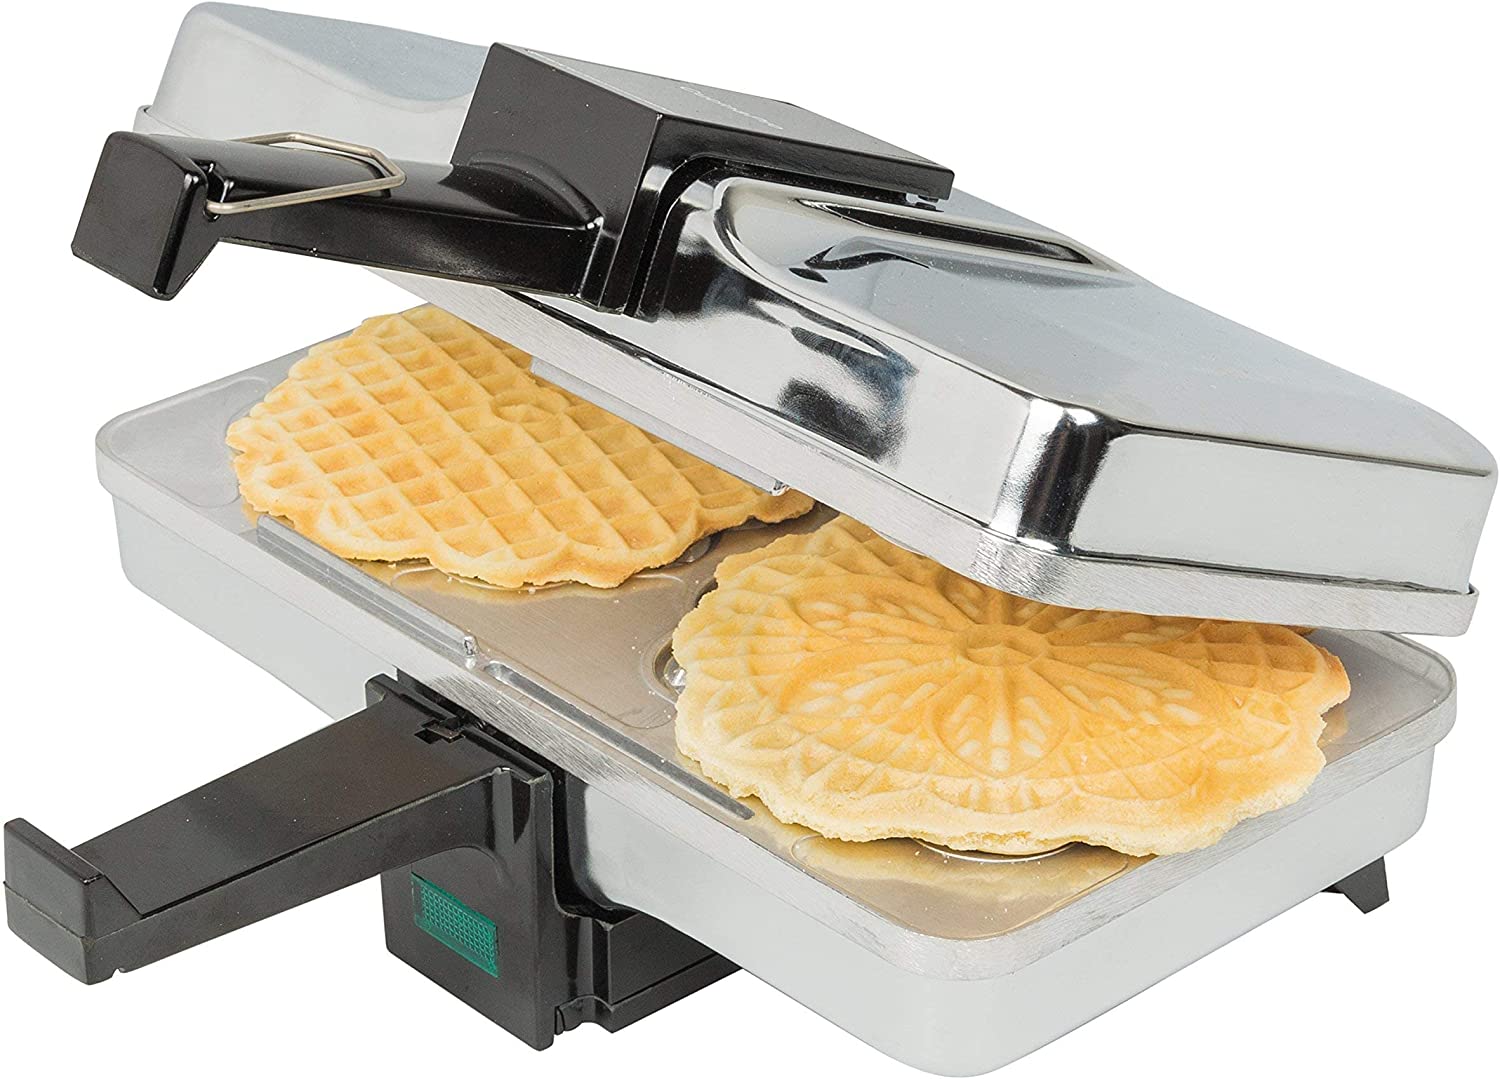 Pizzelle Maker - Polished Electric Baker Press Makes Two 5-Inch Cookies at Once - Recipes Included - image 4 of 5